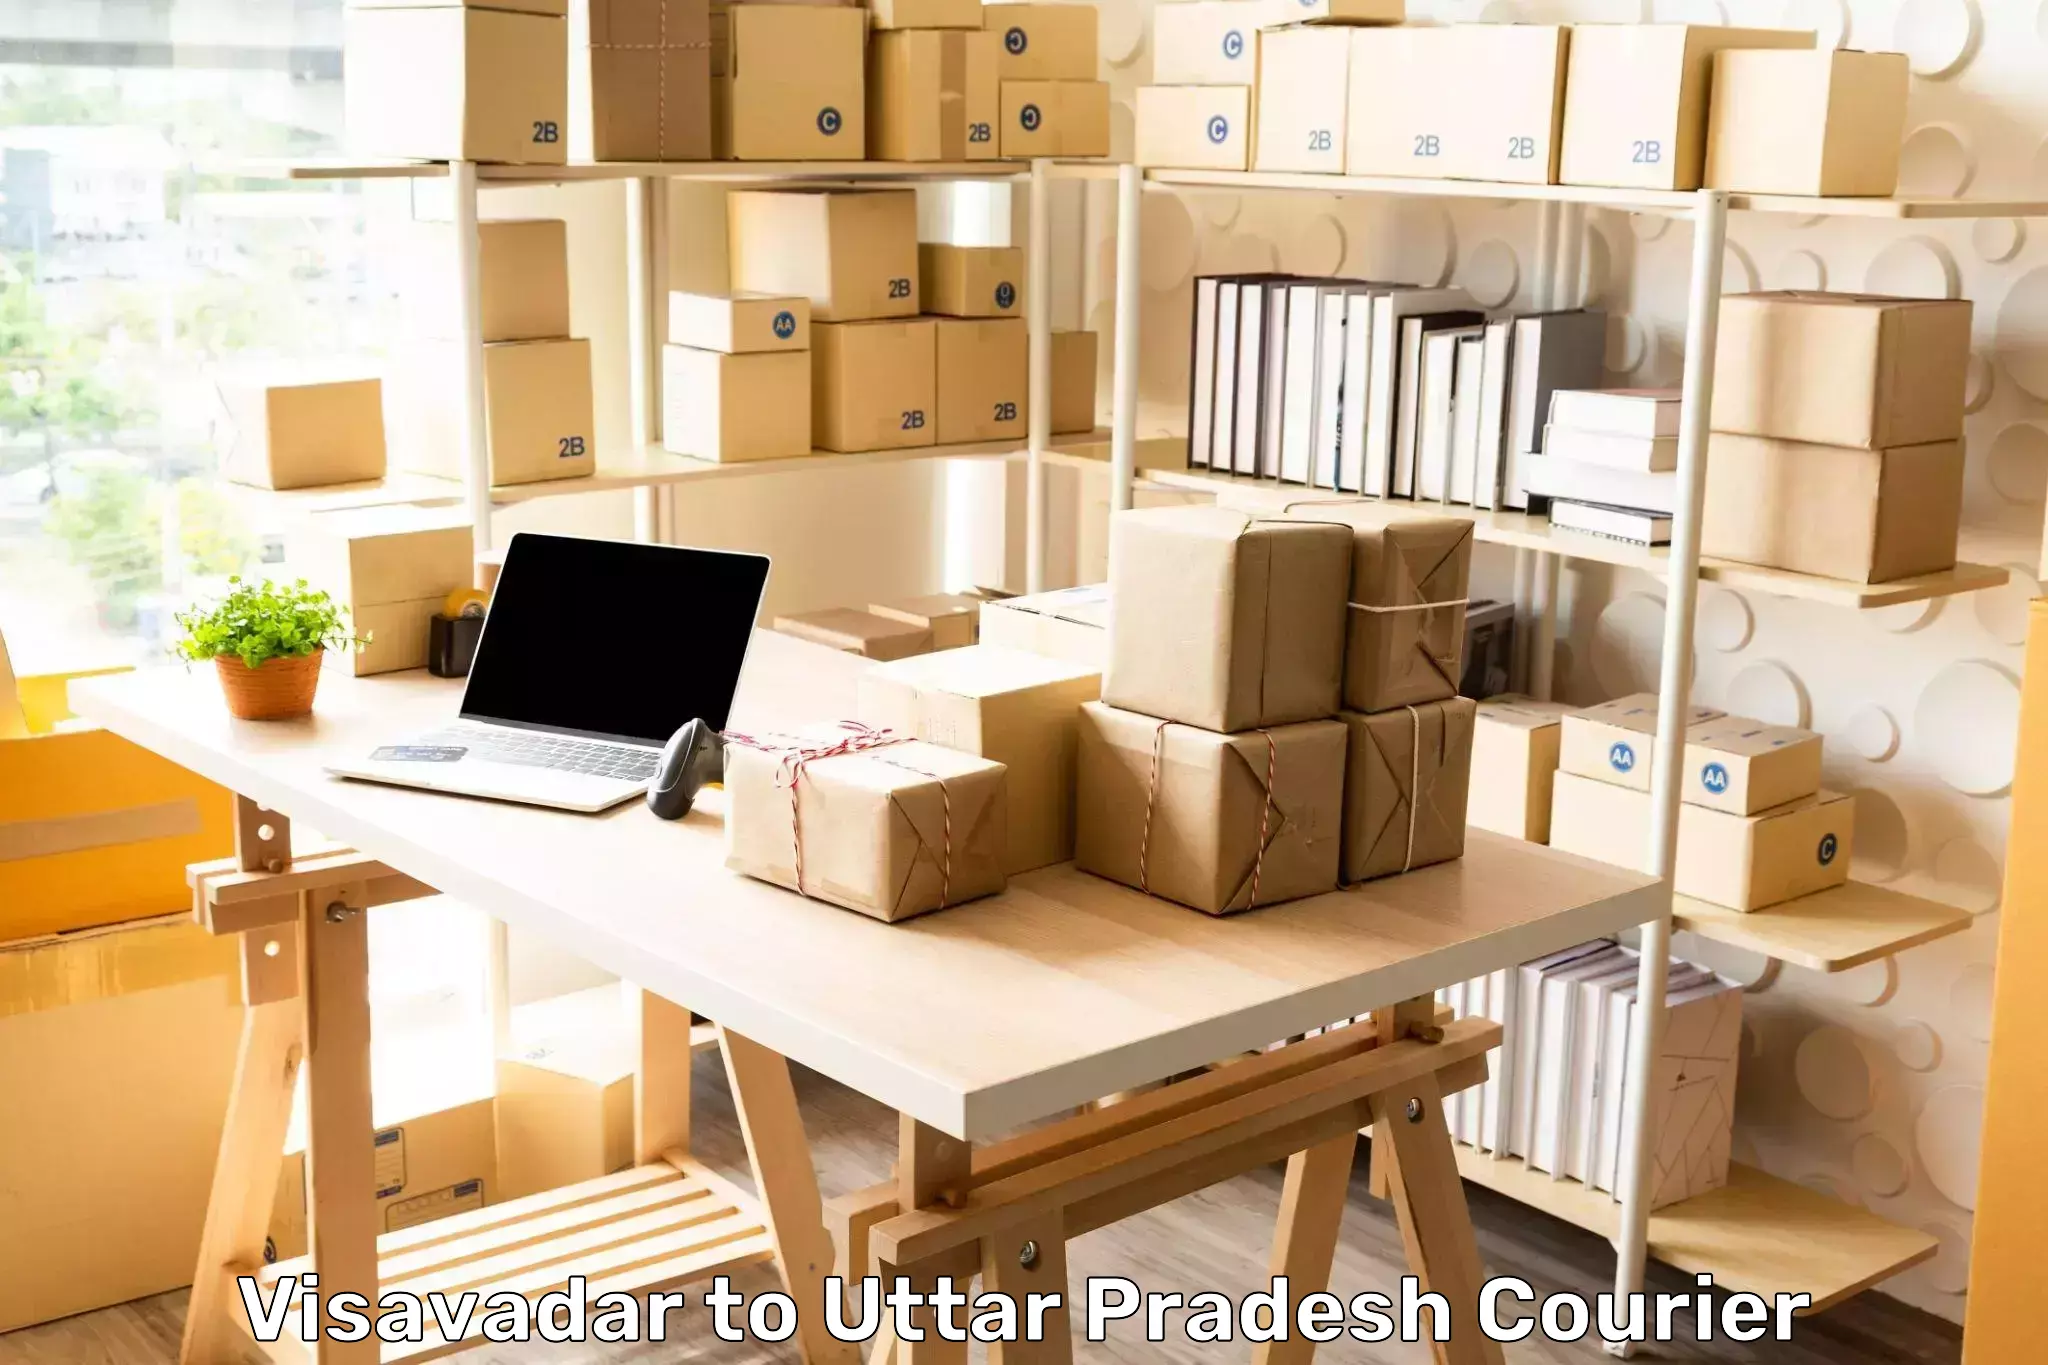 Global courier networks Visavadar to Agra